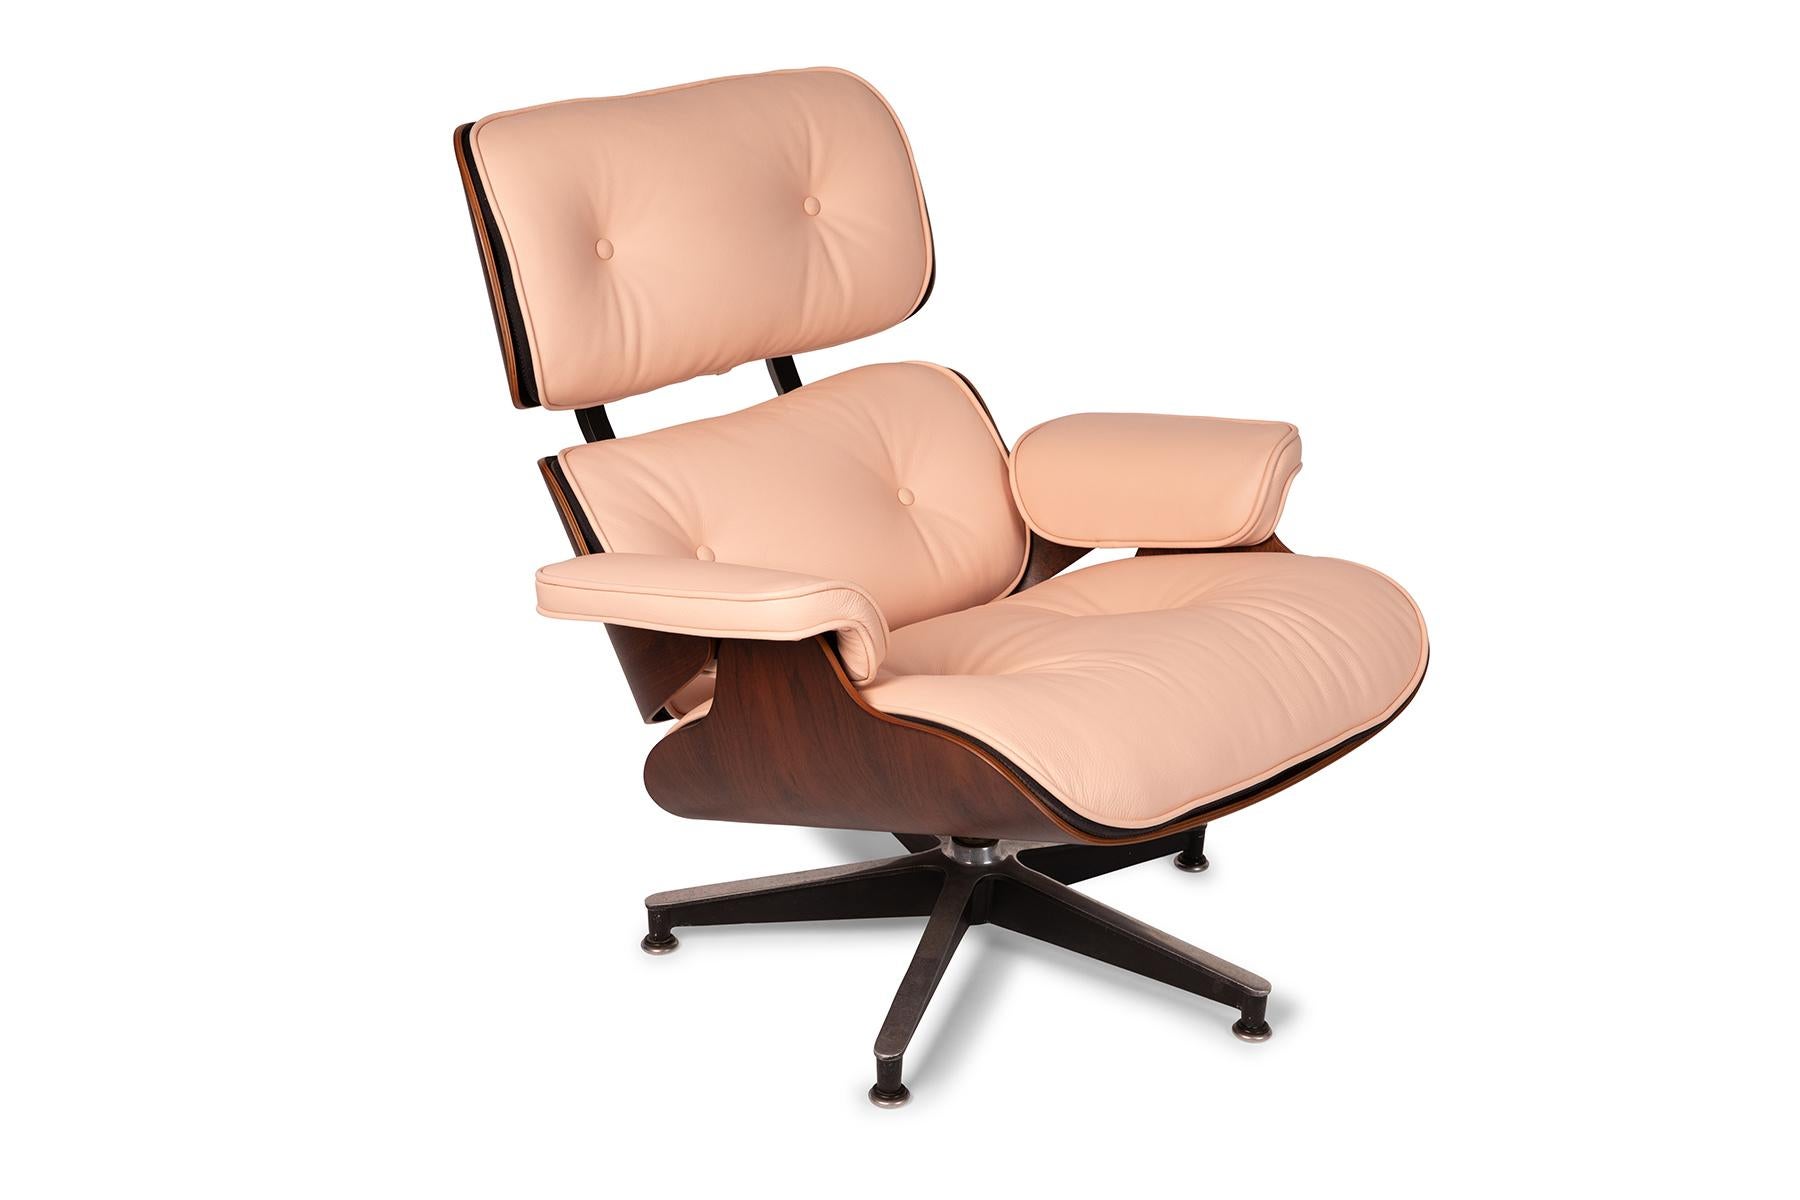 This Charles and Ray Eames for Herman Miller lounge chair and ottoman has beautifully grained rosewood shells and has been newly upholstered in a supple light pink leather. Price listed is for the chair and ottoman.